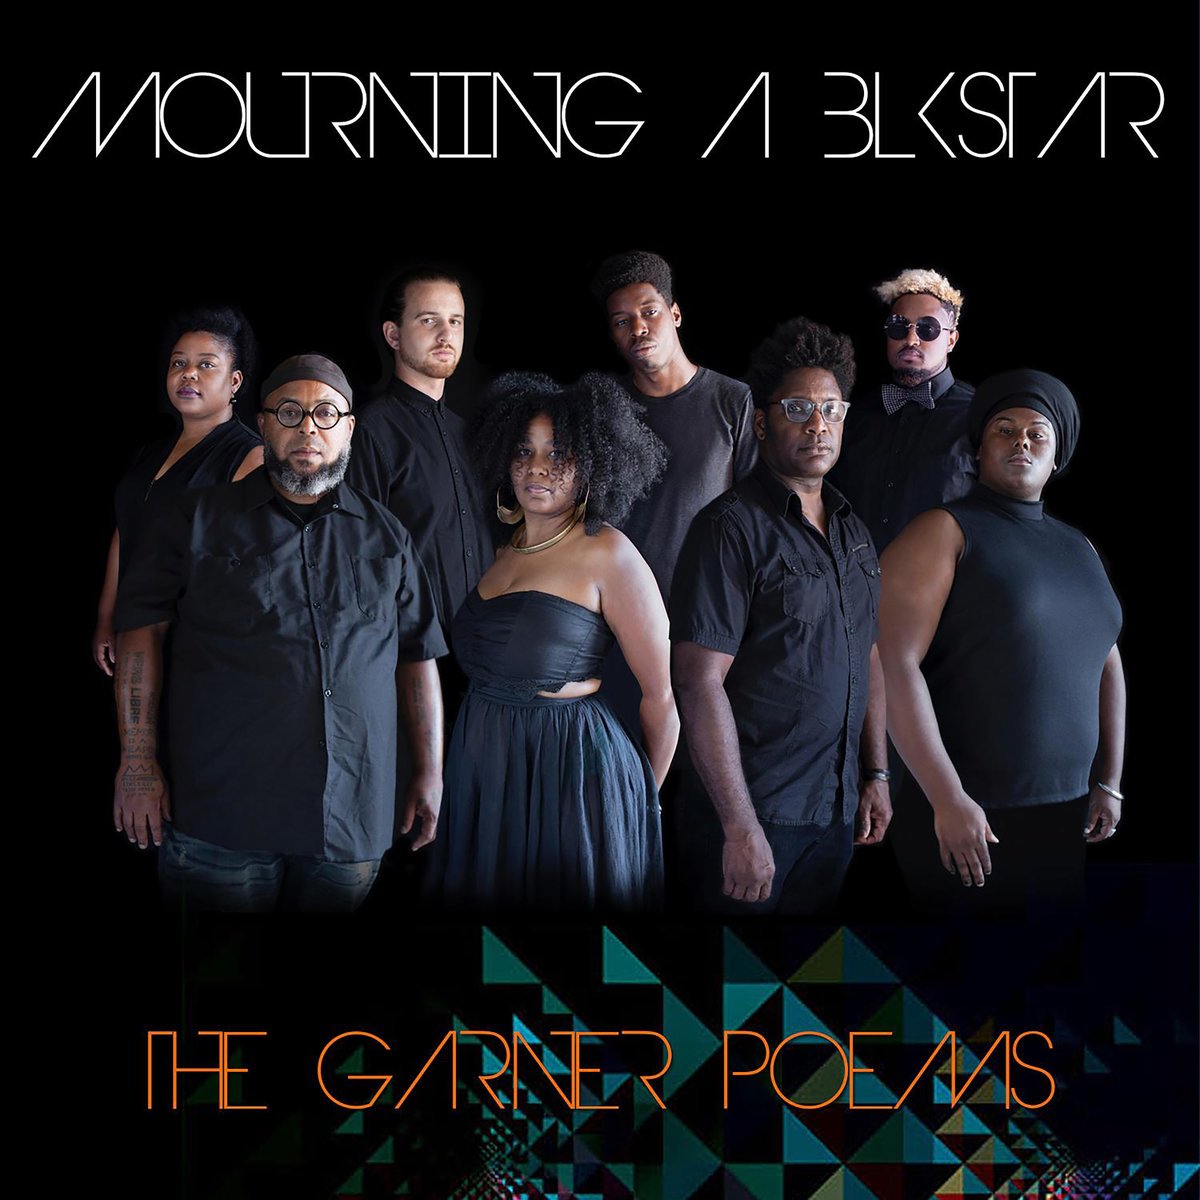 Mourning A BLKstar- The Garner Poems
#mourningABLKstar
takeeffectreviews.com/#/mourning-a-b…